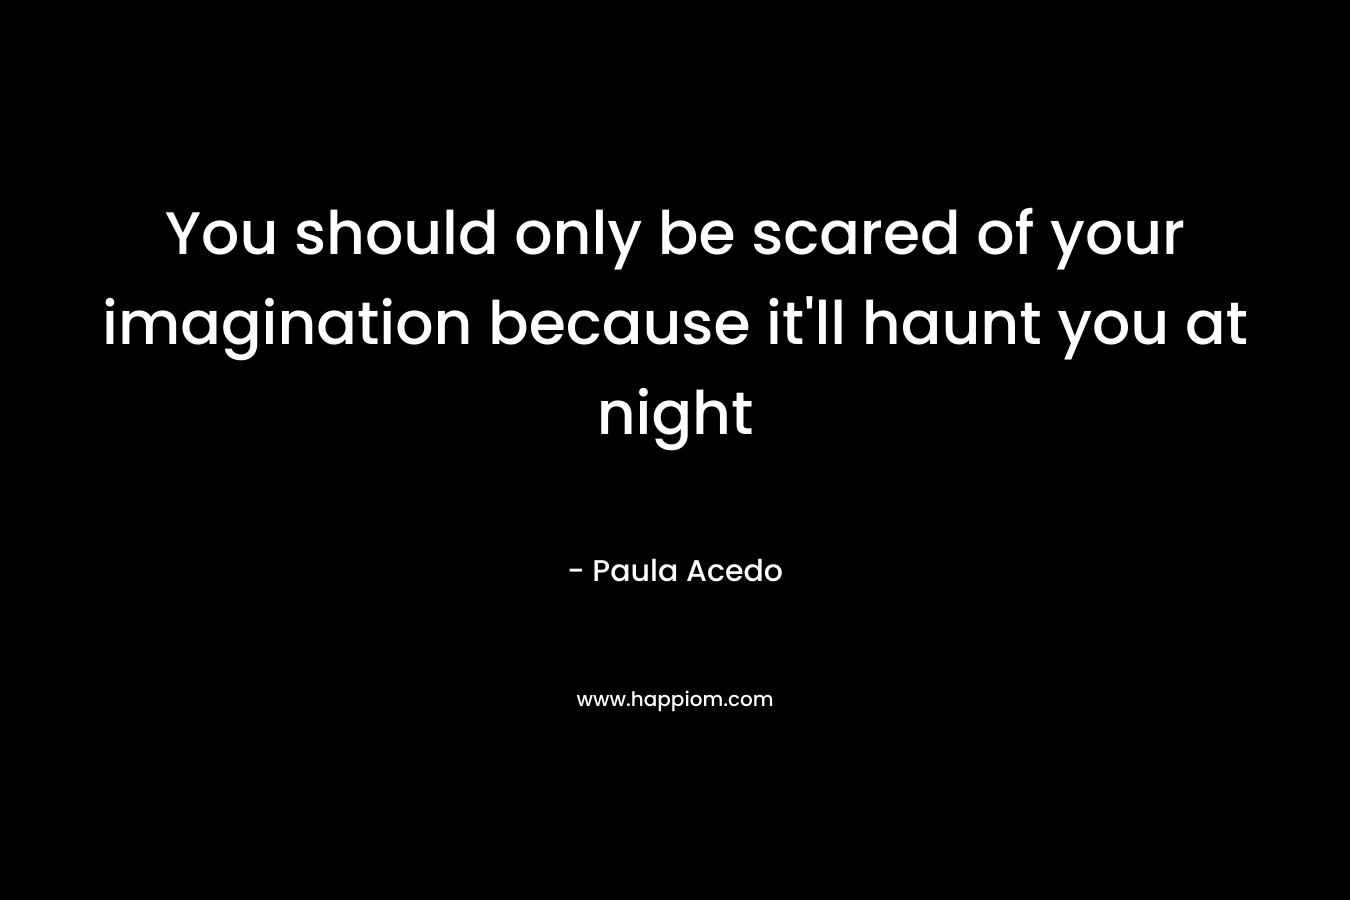 You should only be scared of your imagination because it’ll haunt you at night – Paula Acedo